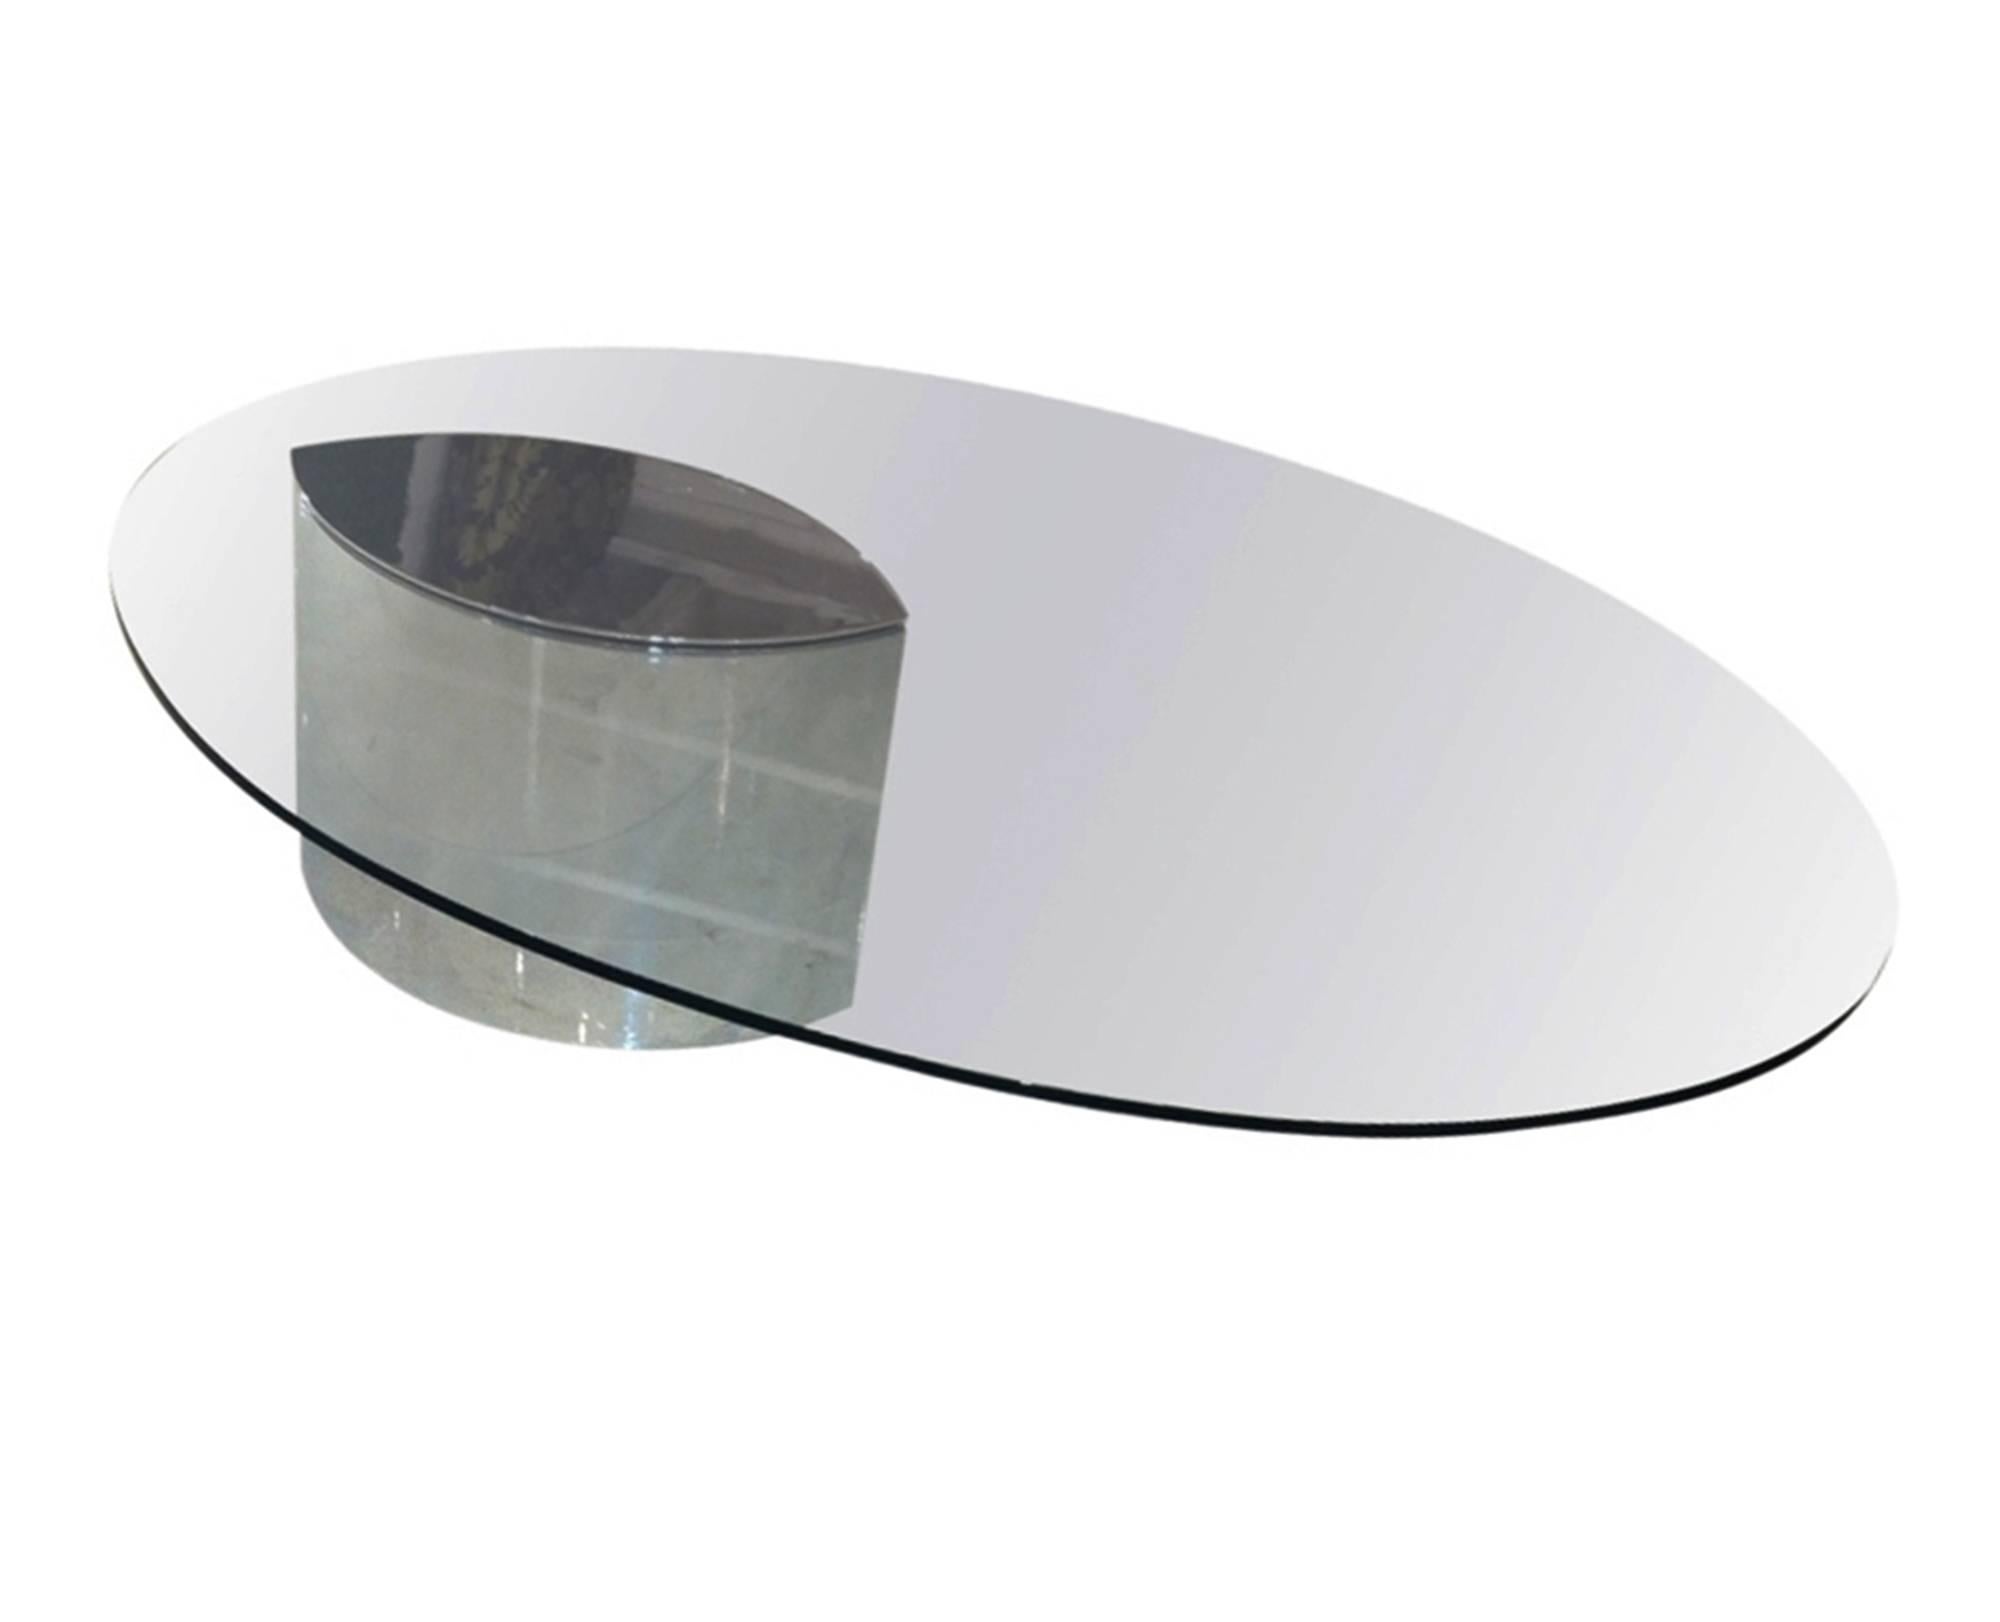 Originally designed in the 1970s the Lunario table is a truly unique cantilevered table.
The table top is a clear polished oval glass with polished stainless steel inset CAP which sits upon a stainless steel base. Weights within the base